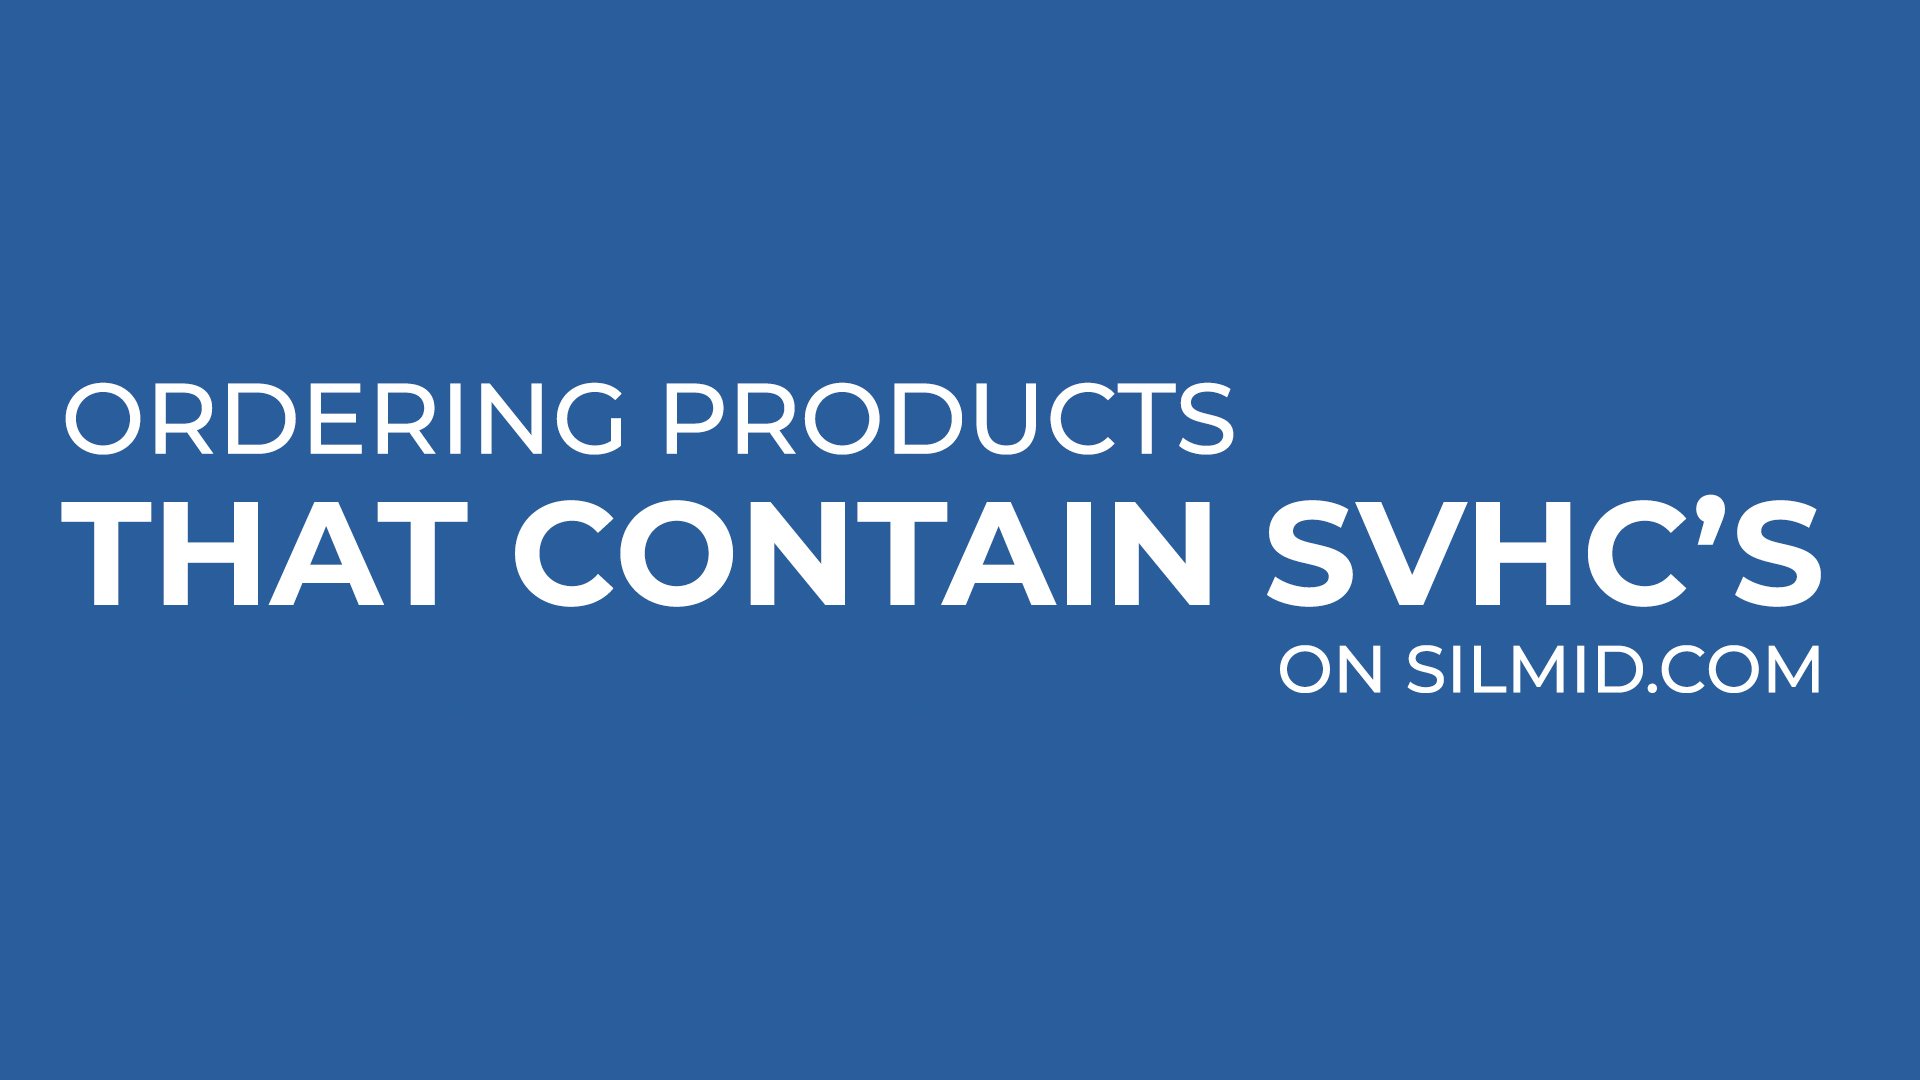 Ordering products that contain SVHC'S